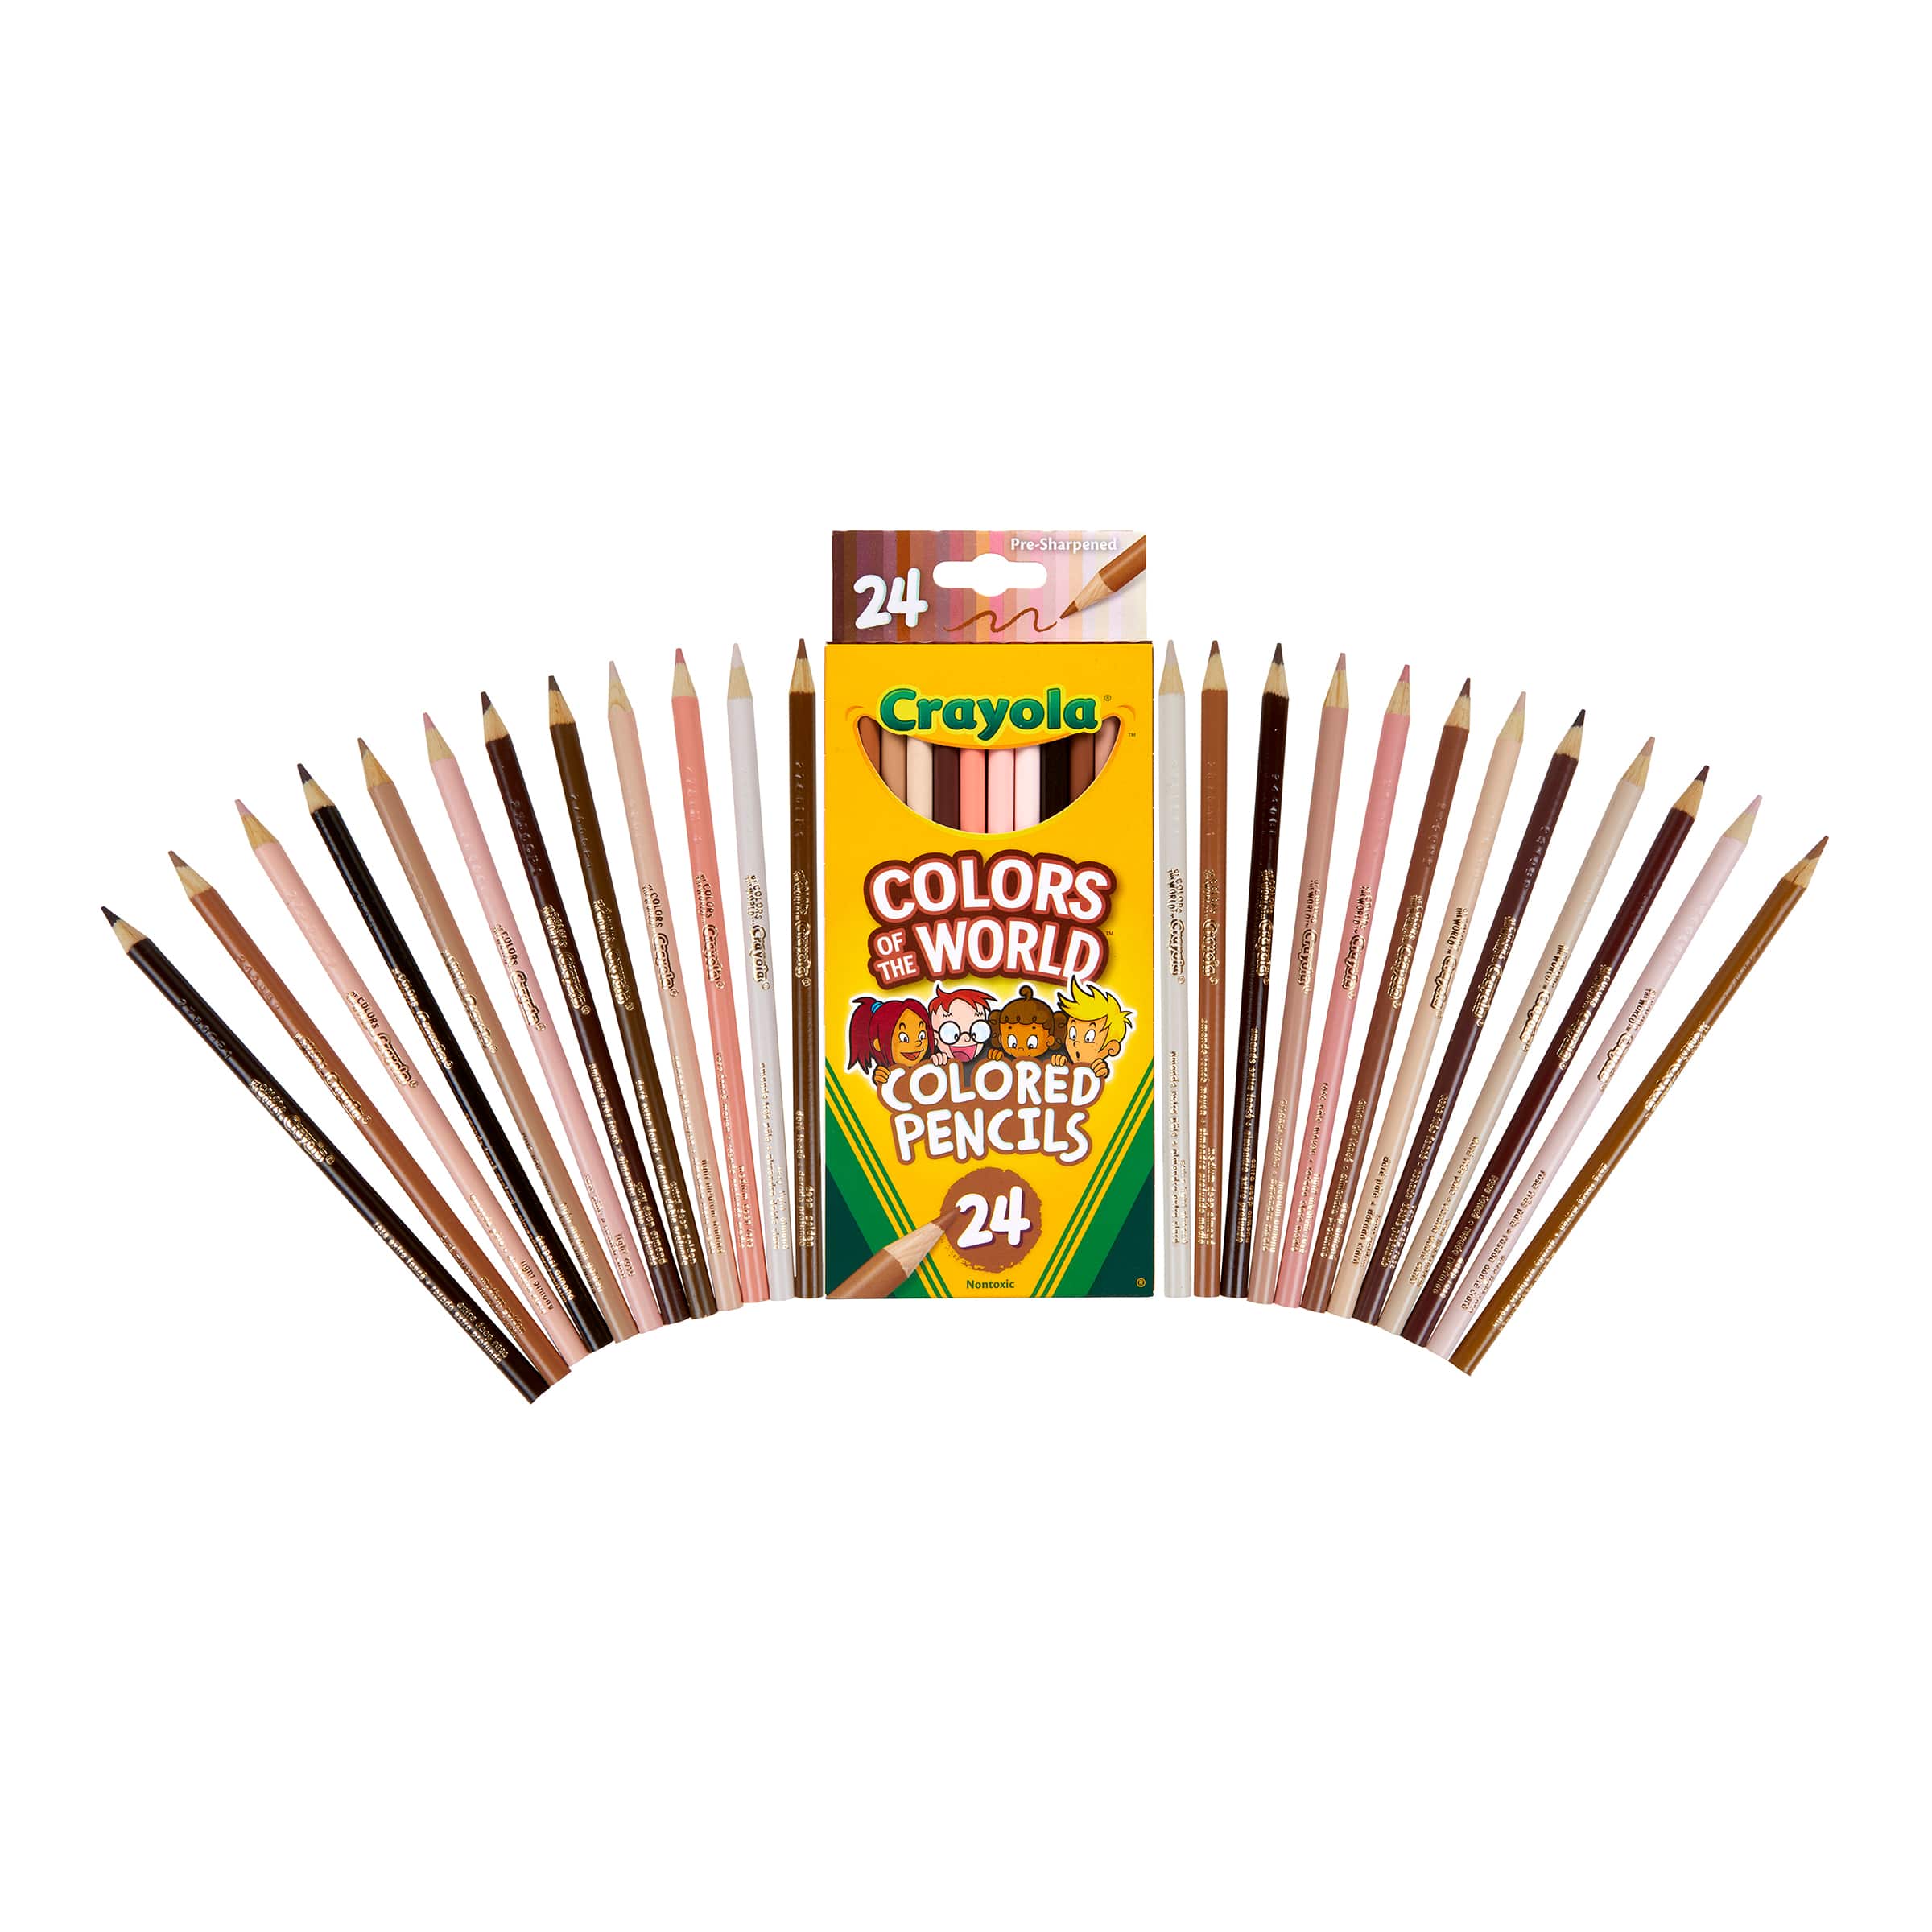 Crayola® Colors of the World Colored Pencils, 24 ct - Jay C Food